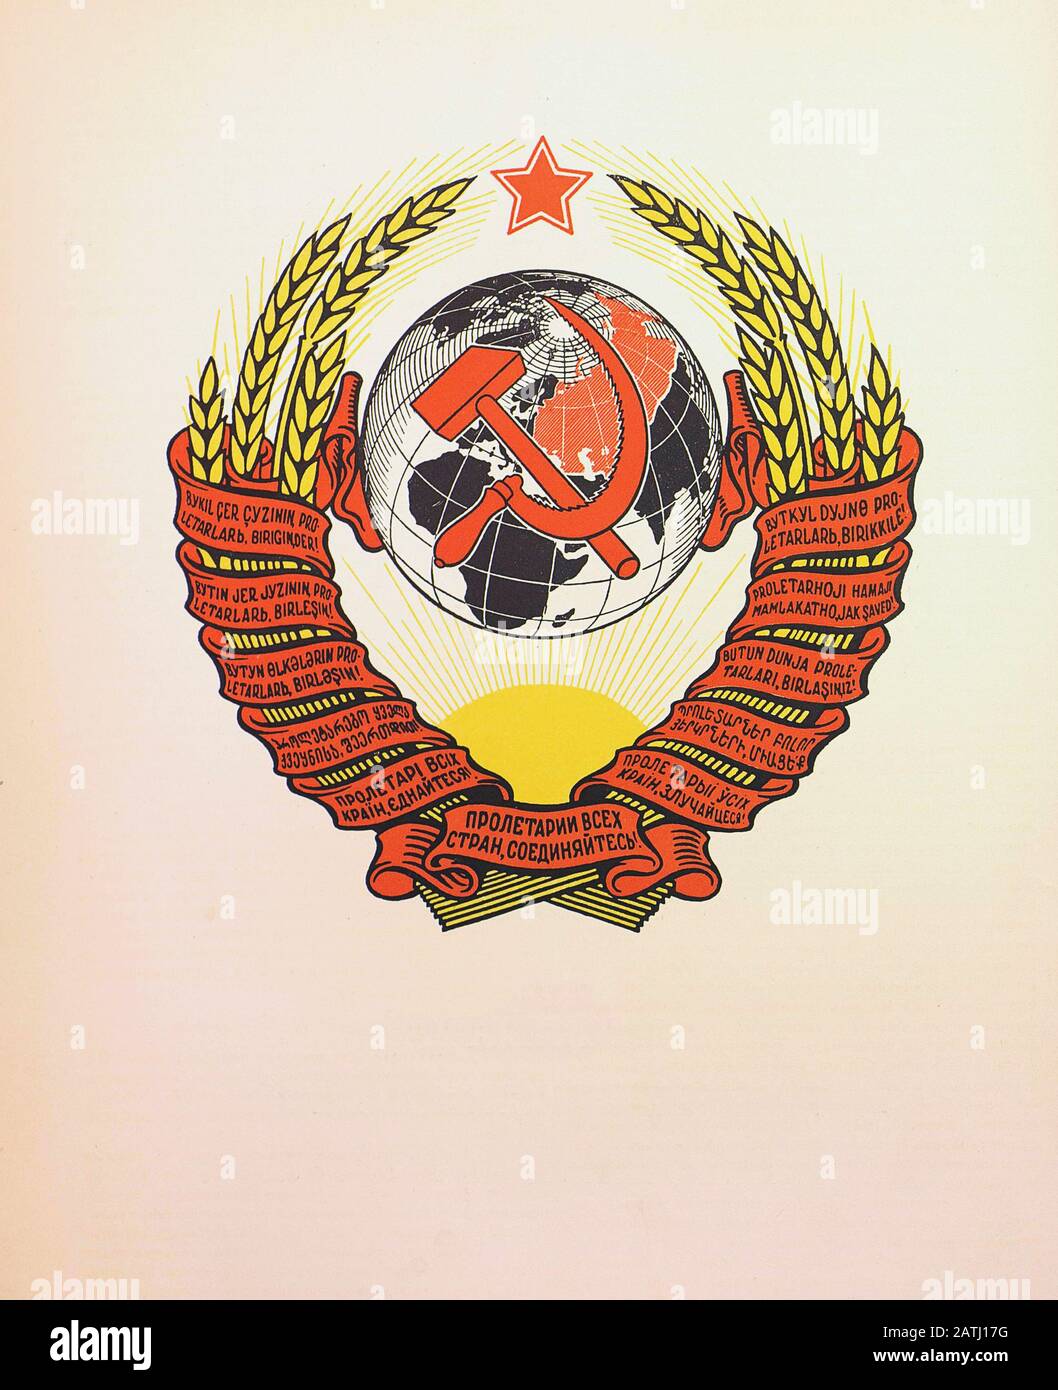 Сoat of arms of the Soviet Union. From soviet propaganda book. 1937 Stock Photo